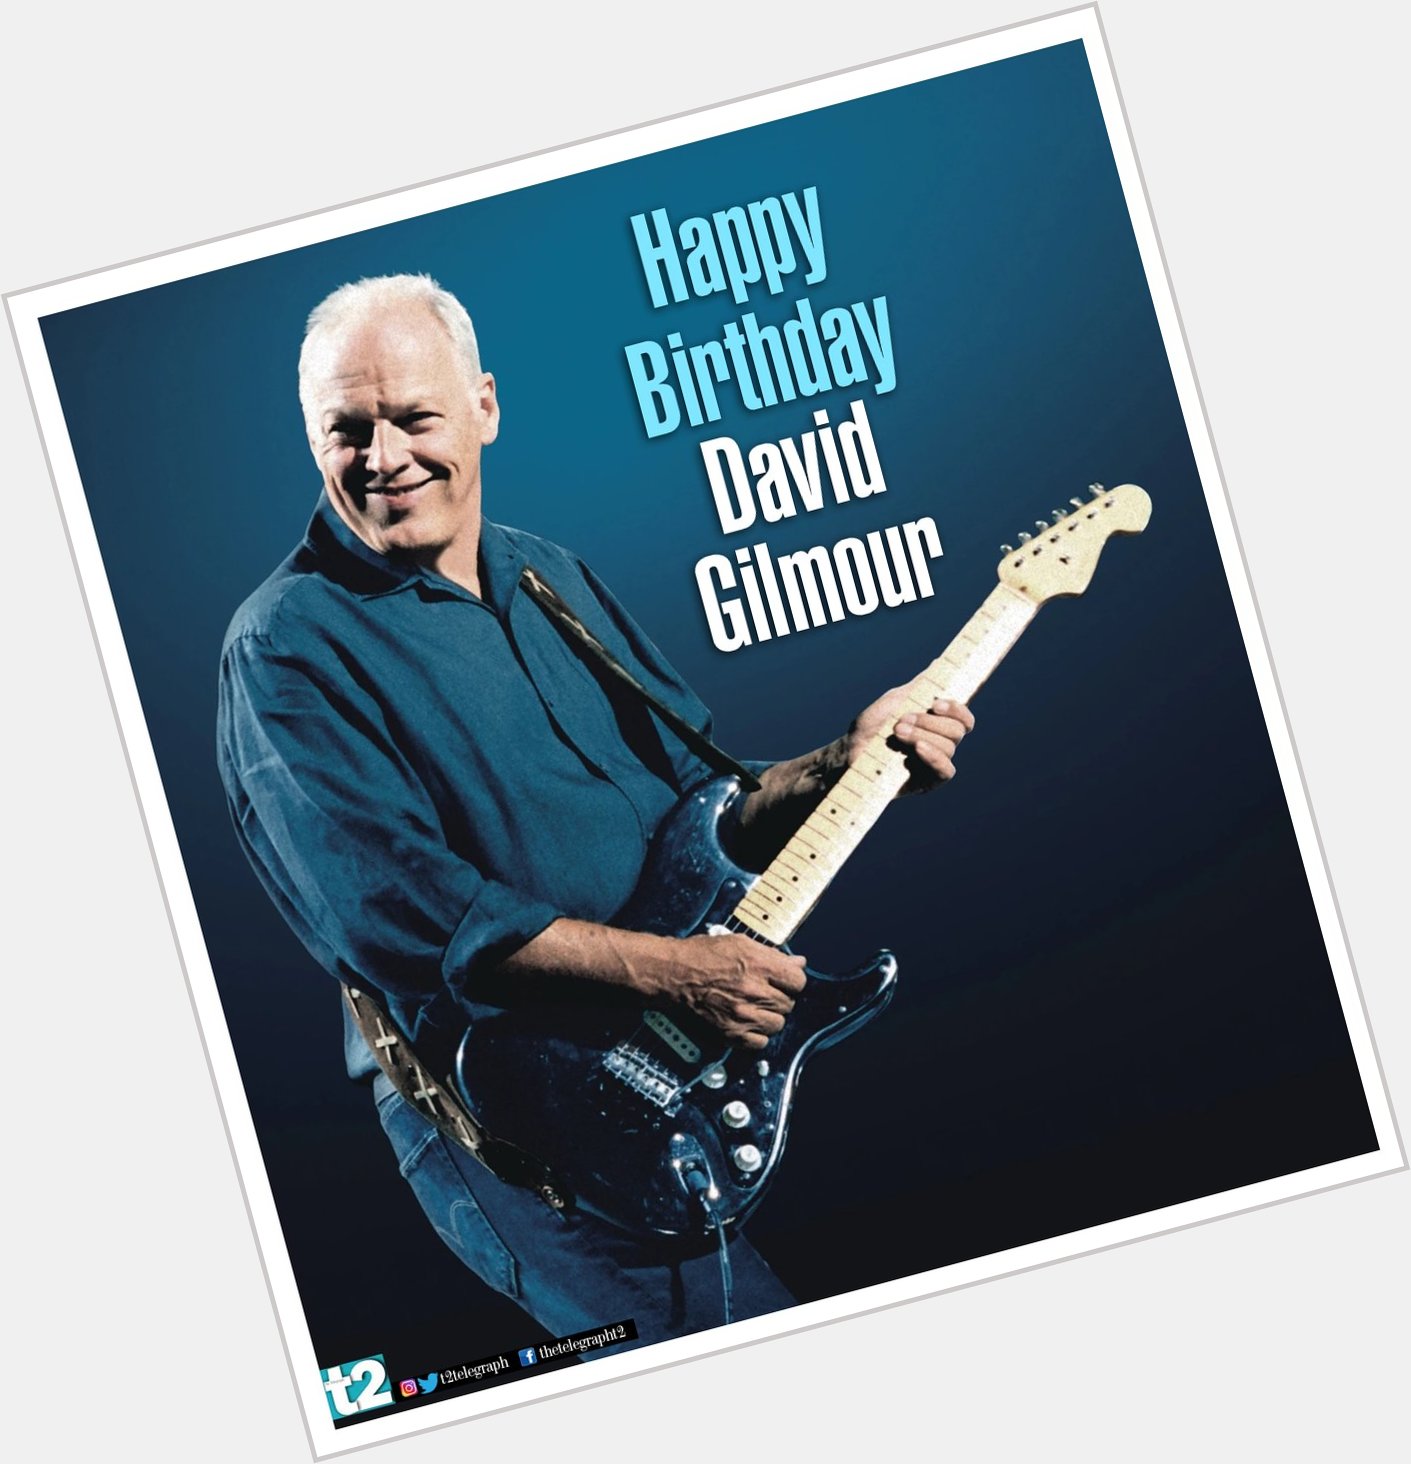 Happy birthday David Gilmour, the man with cutting-edge colossal sounds. 